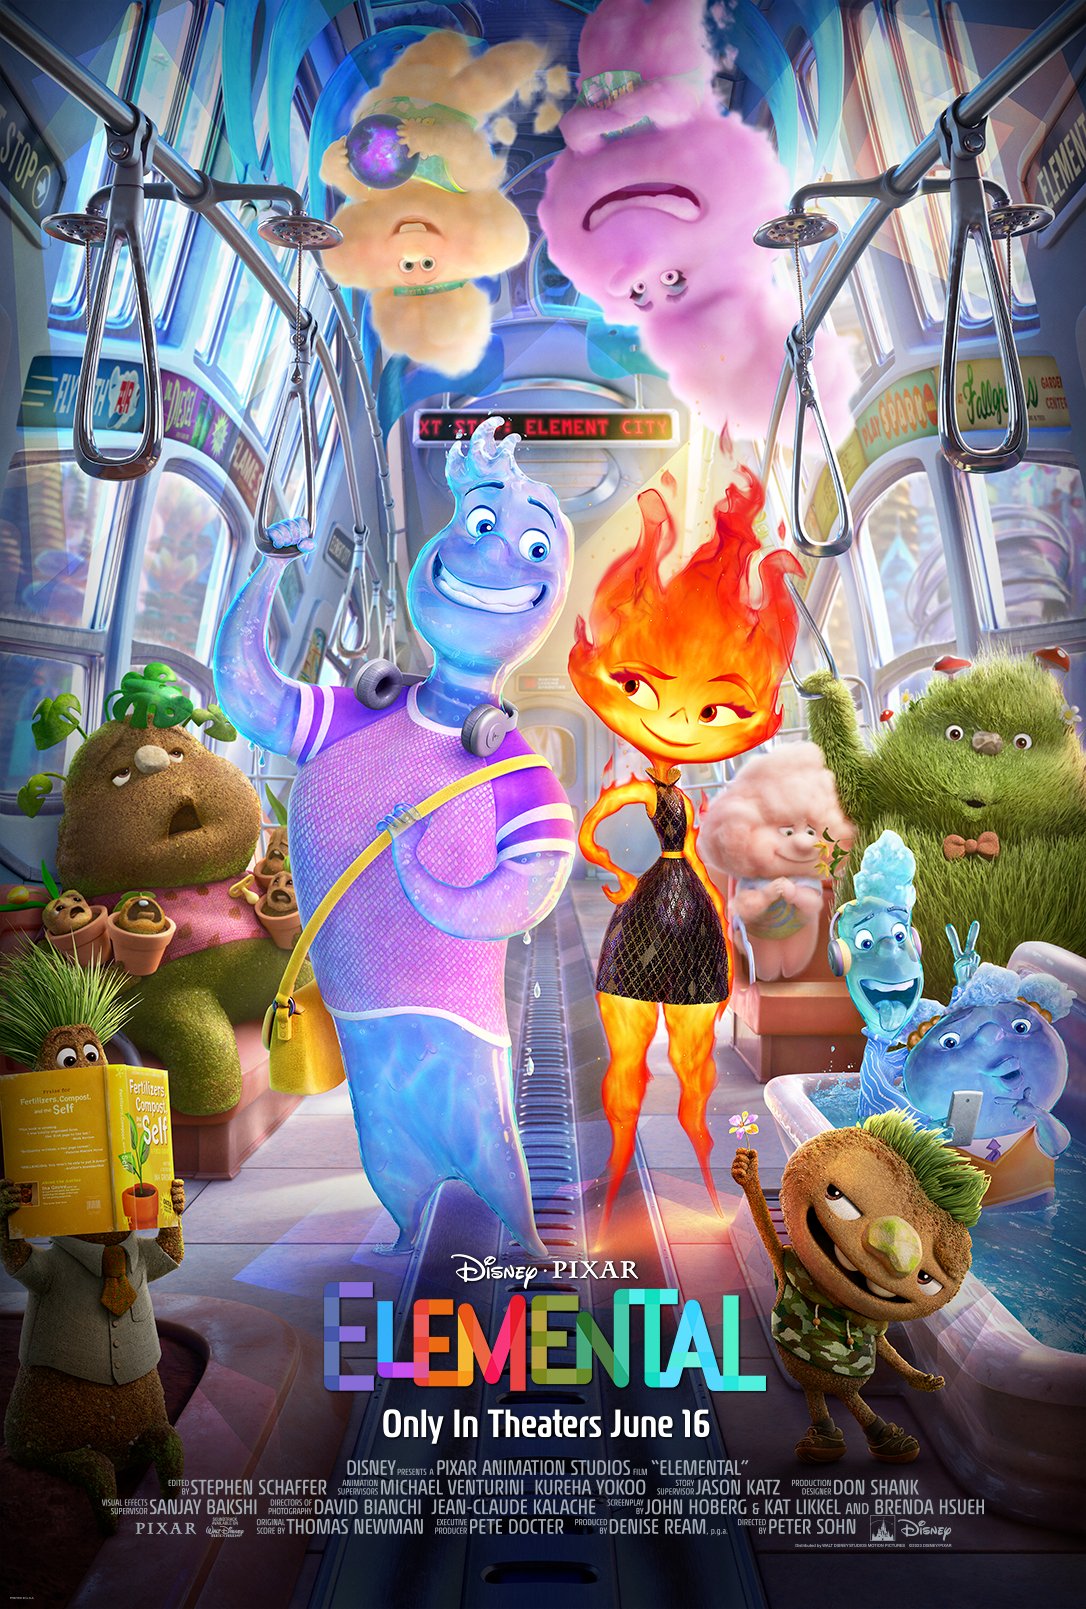 New official poster for Pixar's 'Elemental'